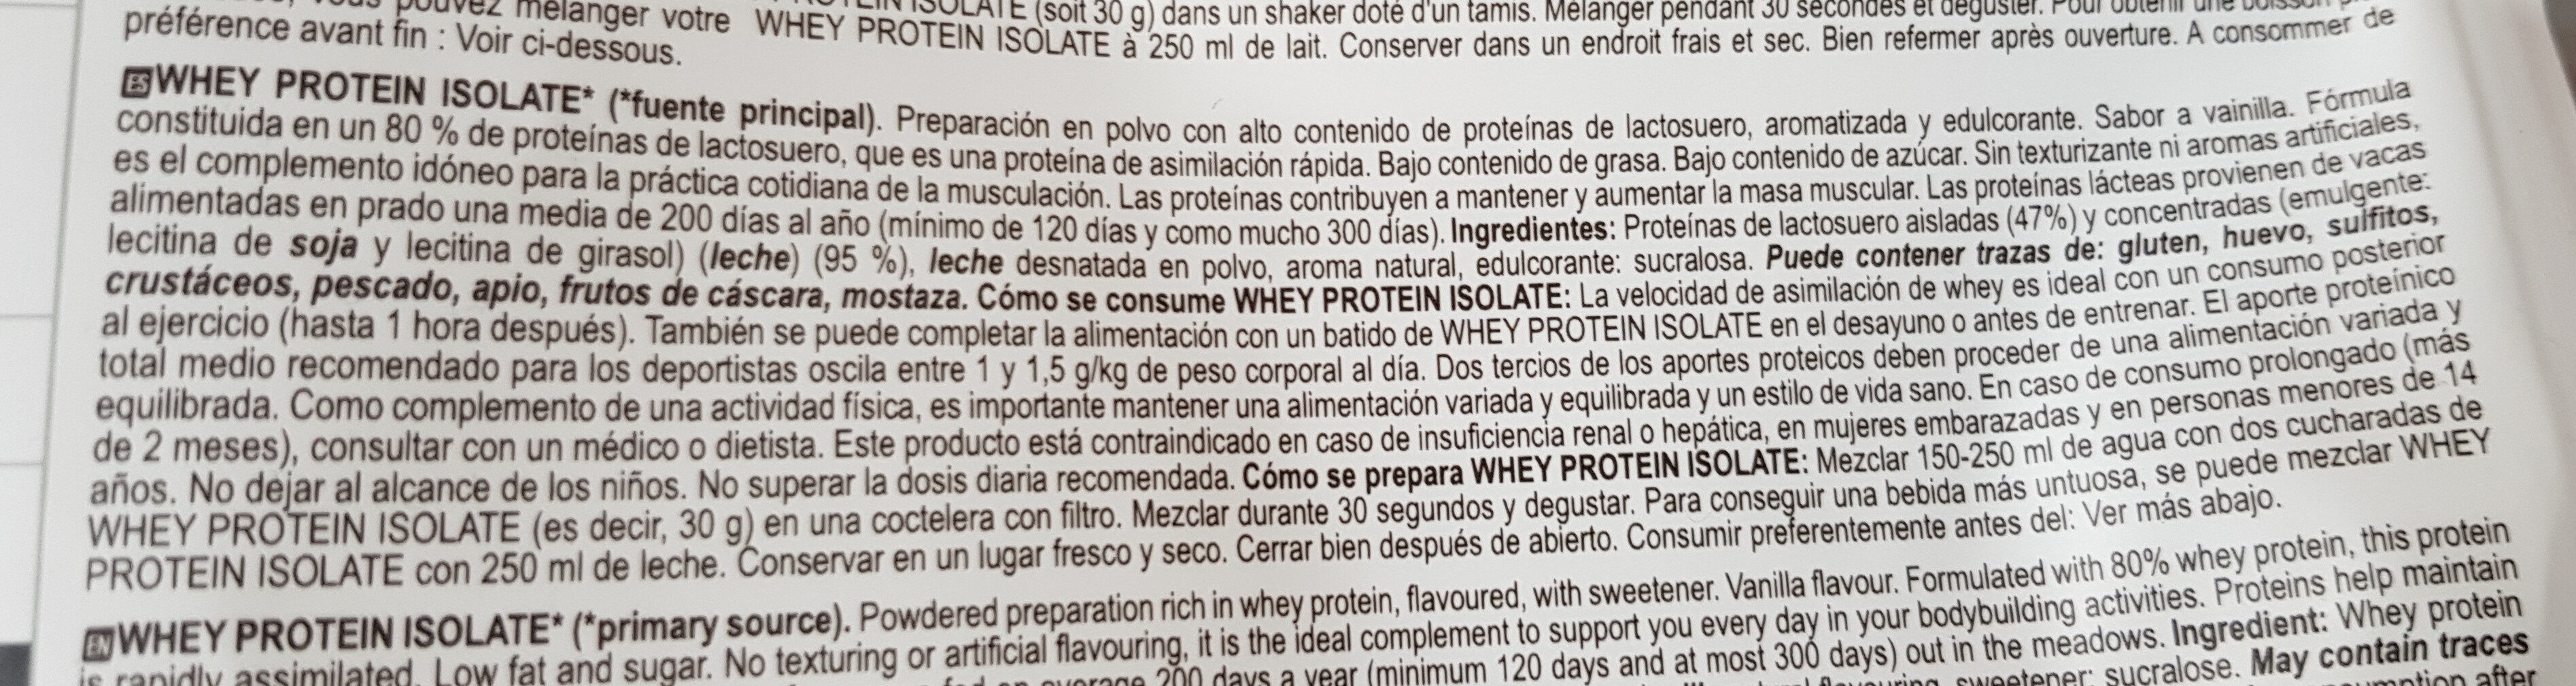 ISOLATE WHEY PROTEIN LOW FAT & SUGAR - Ingredients - es